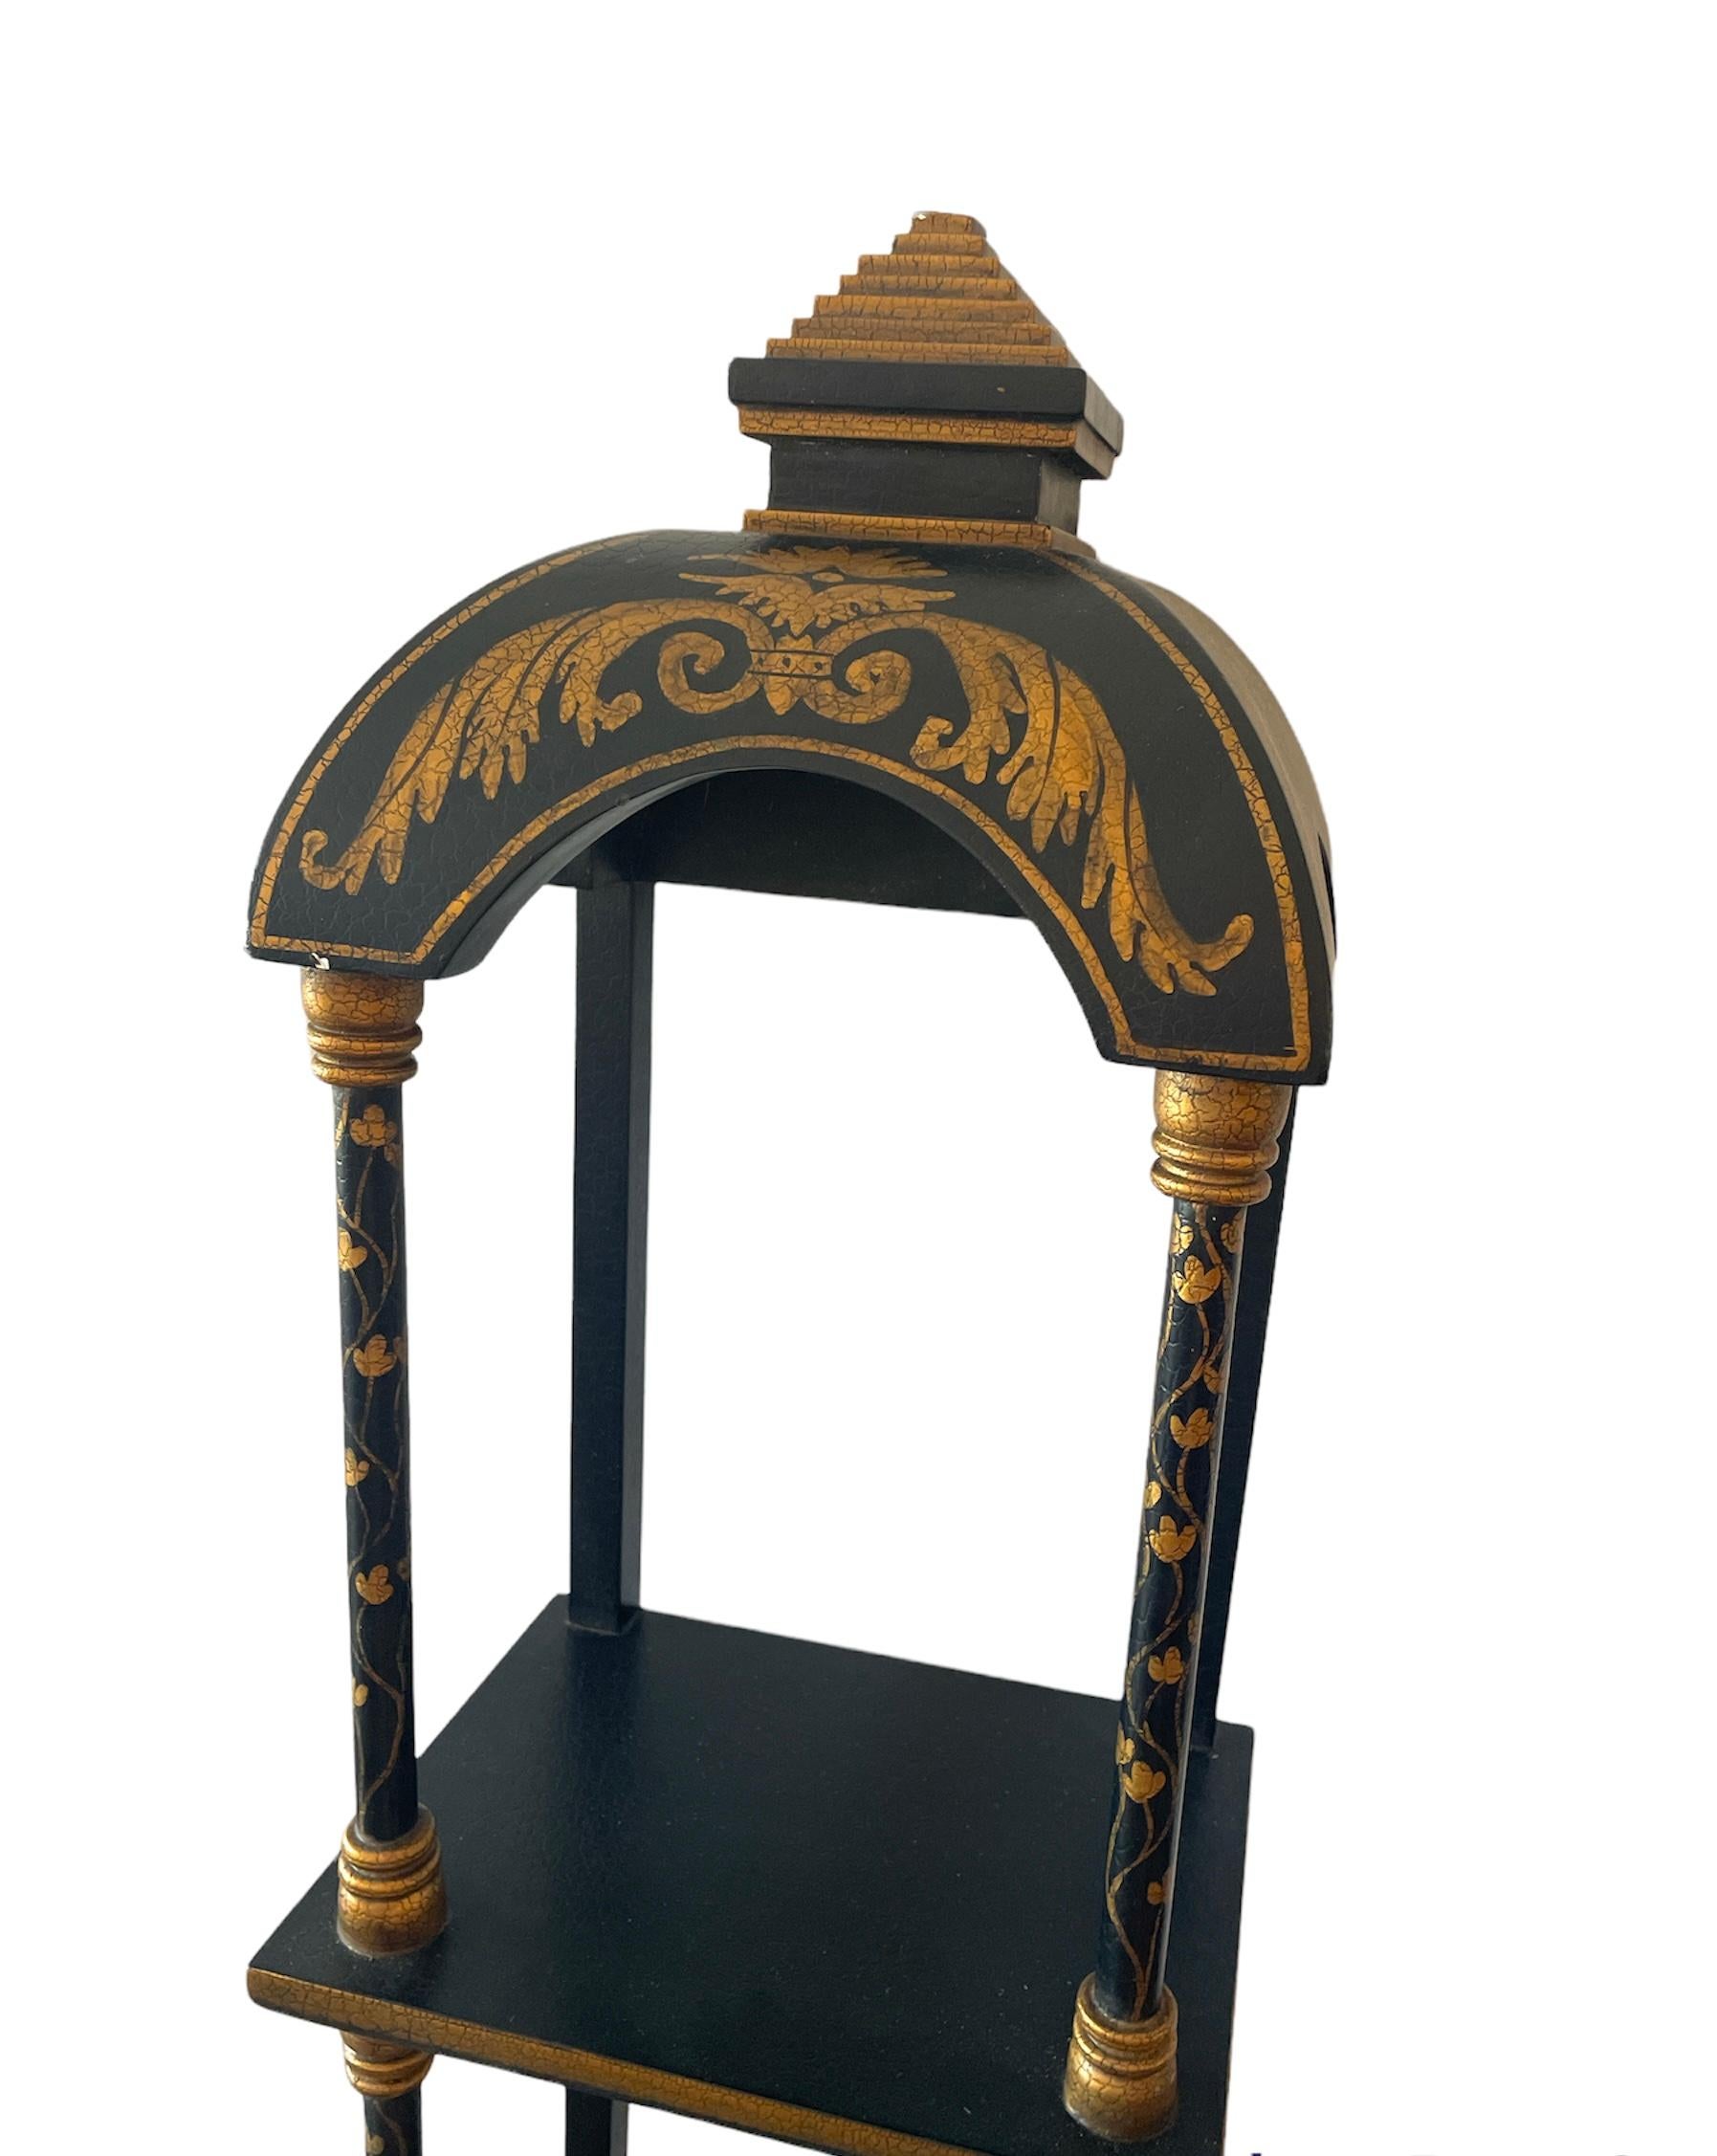 Beautiful 3  wall shelf with Pagoda on top, painted crackled gold gilt on black crackled paint, the shelve themselves are actually smooth. very clean and unique item.
